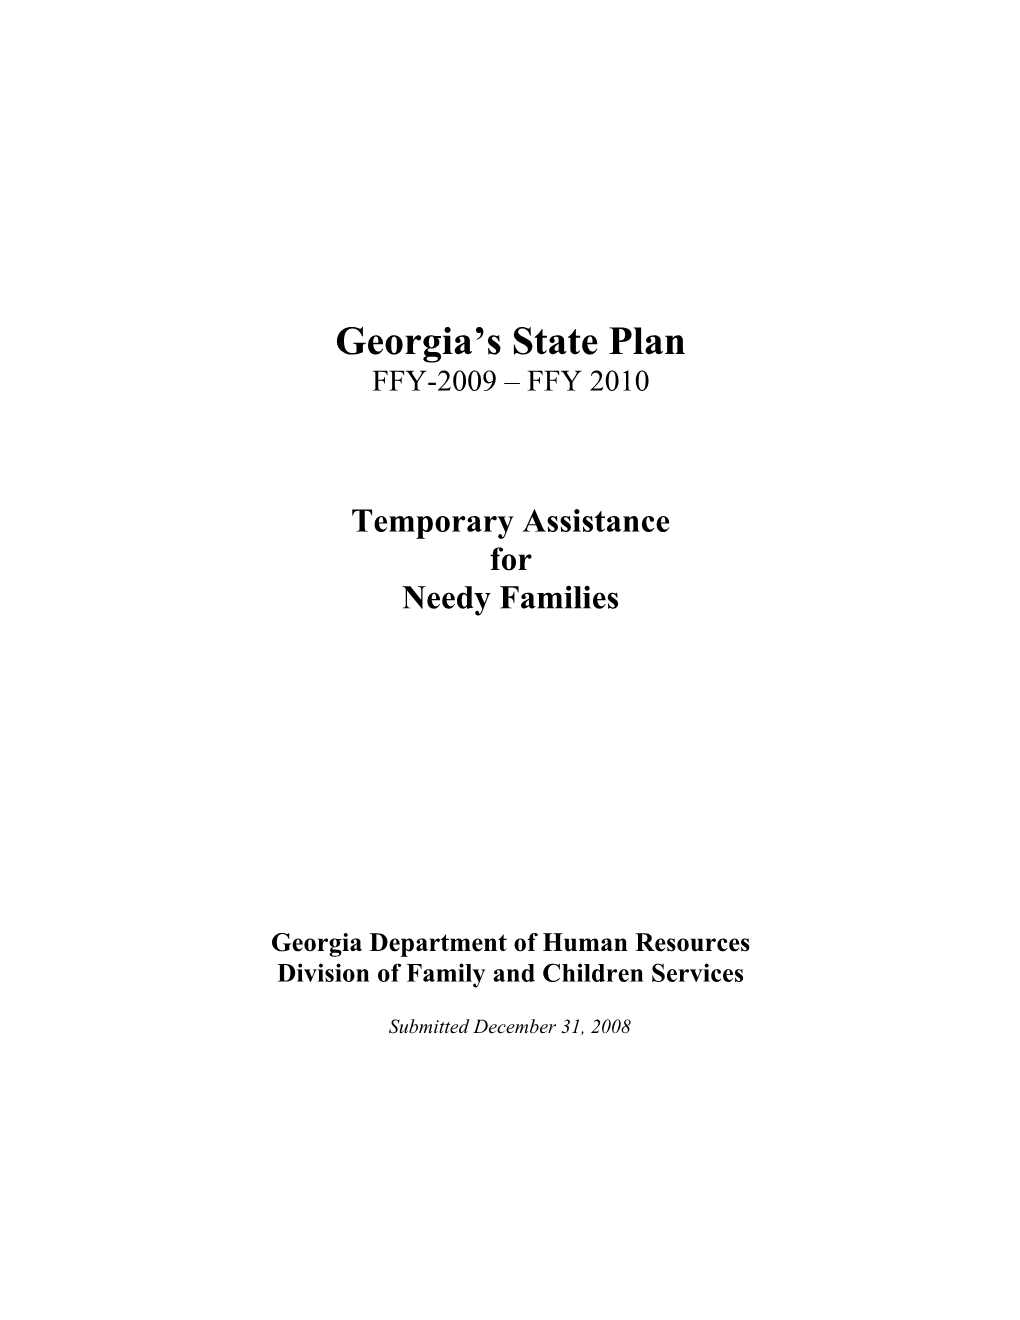 Georgia S Temporary Assistance for Needy Families State Plan for FFY 2006